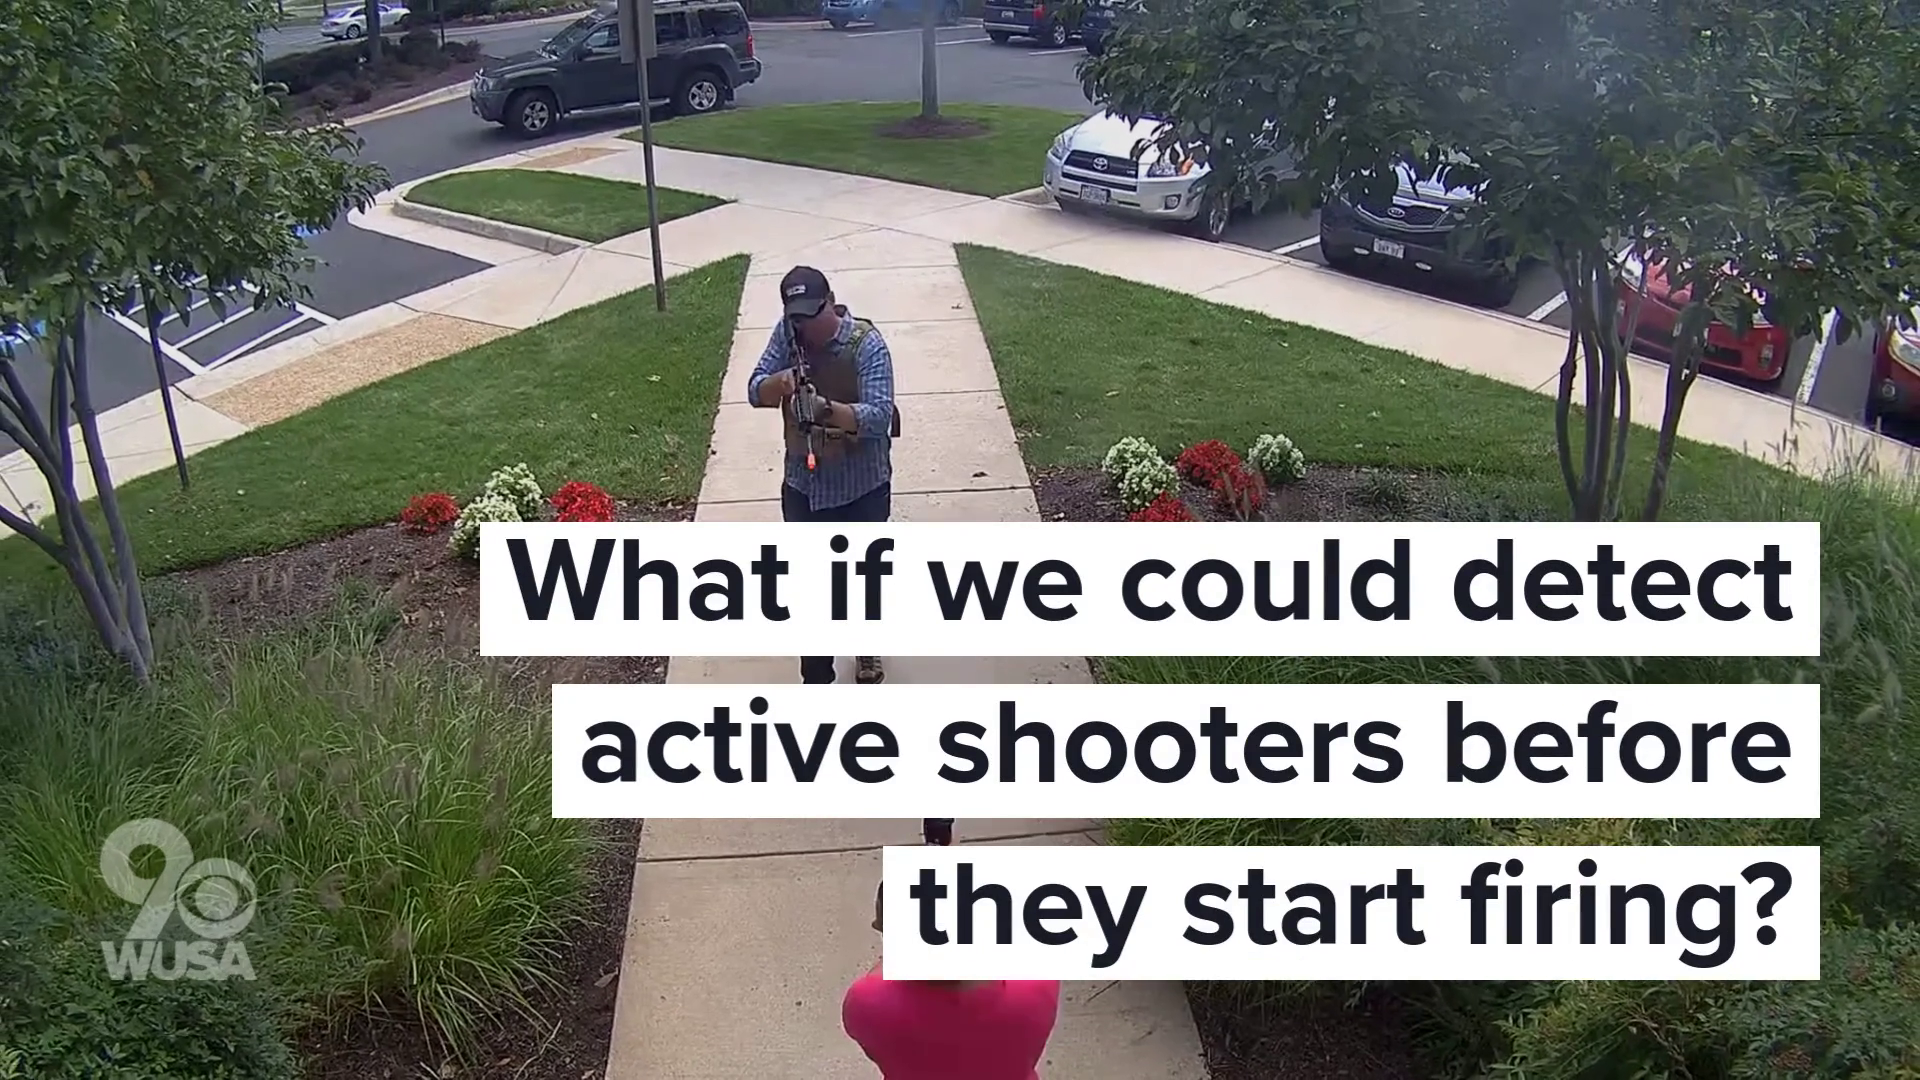 A group of veterans, inspired by the need to keep schools and public spaces safer, say they’ve created a technology to detect guns and send alerts before shots are e